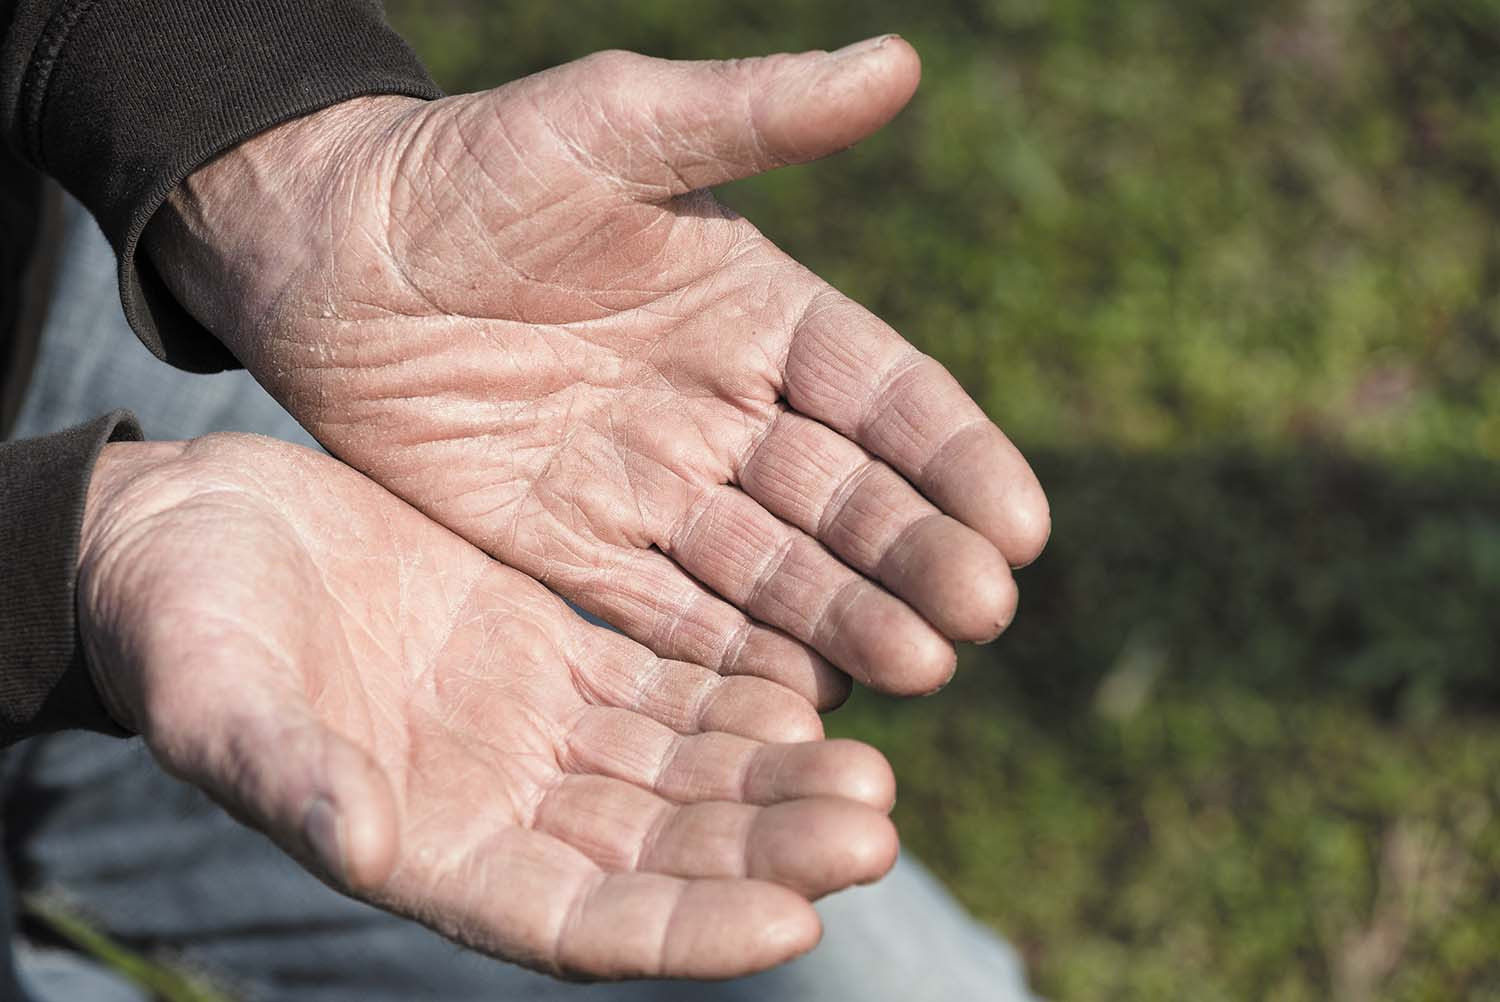 close-up photo of a man holding out his hands with the palms up